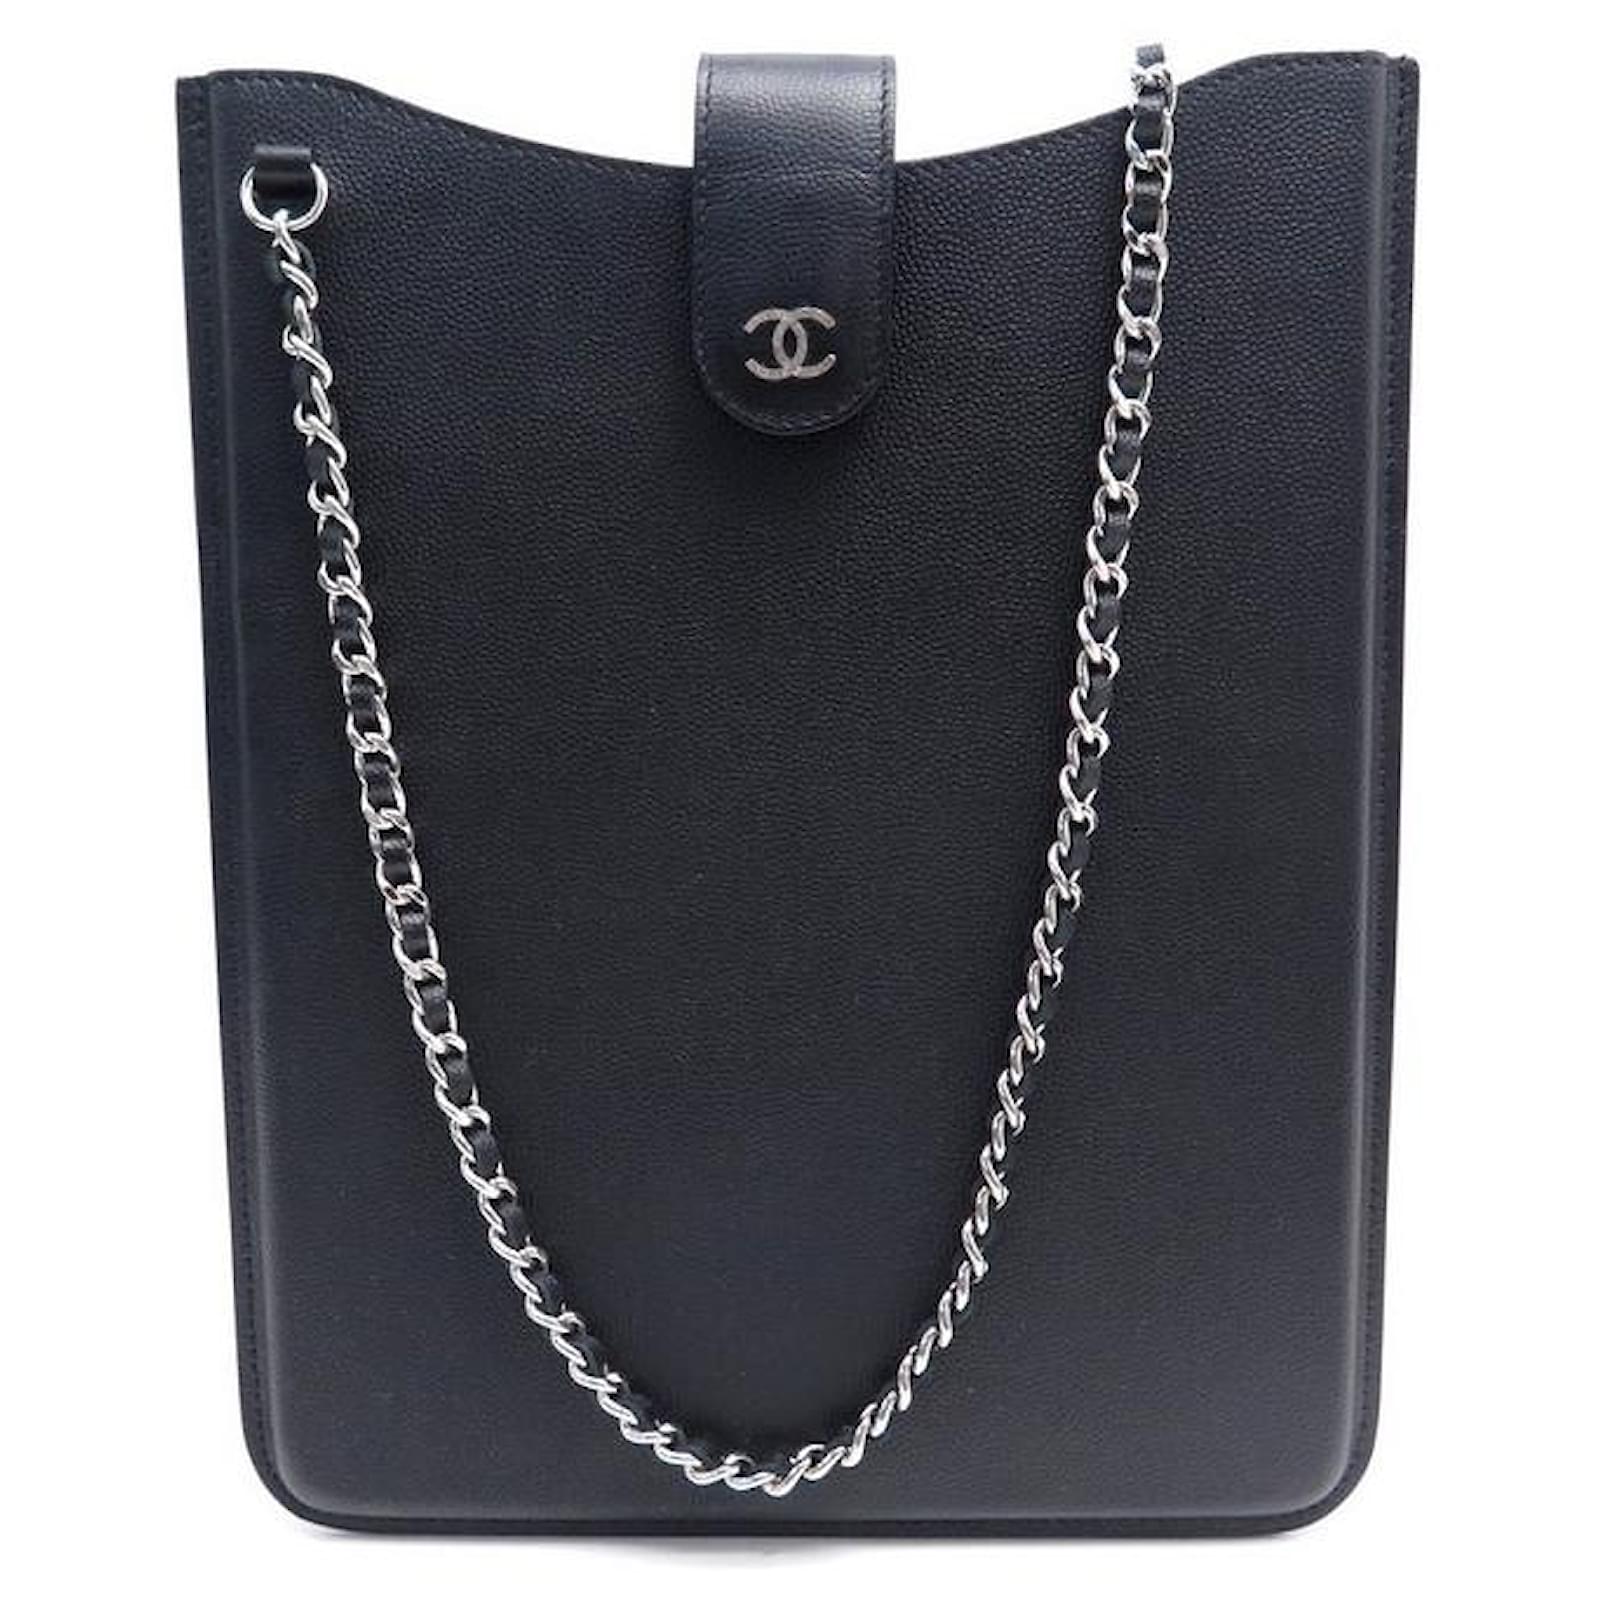 NEW CHANEL BAG IPAD TABLET CASE IN BLACK CAVIAR LEATHER